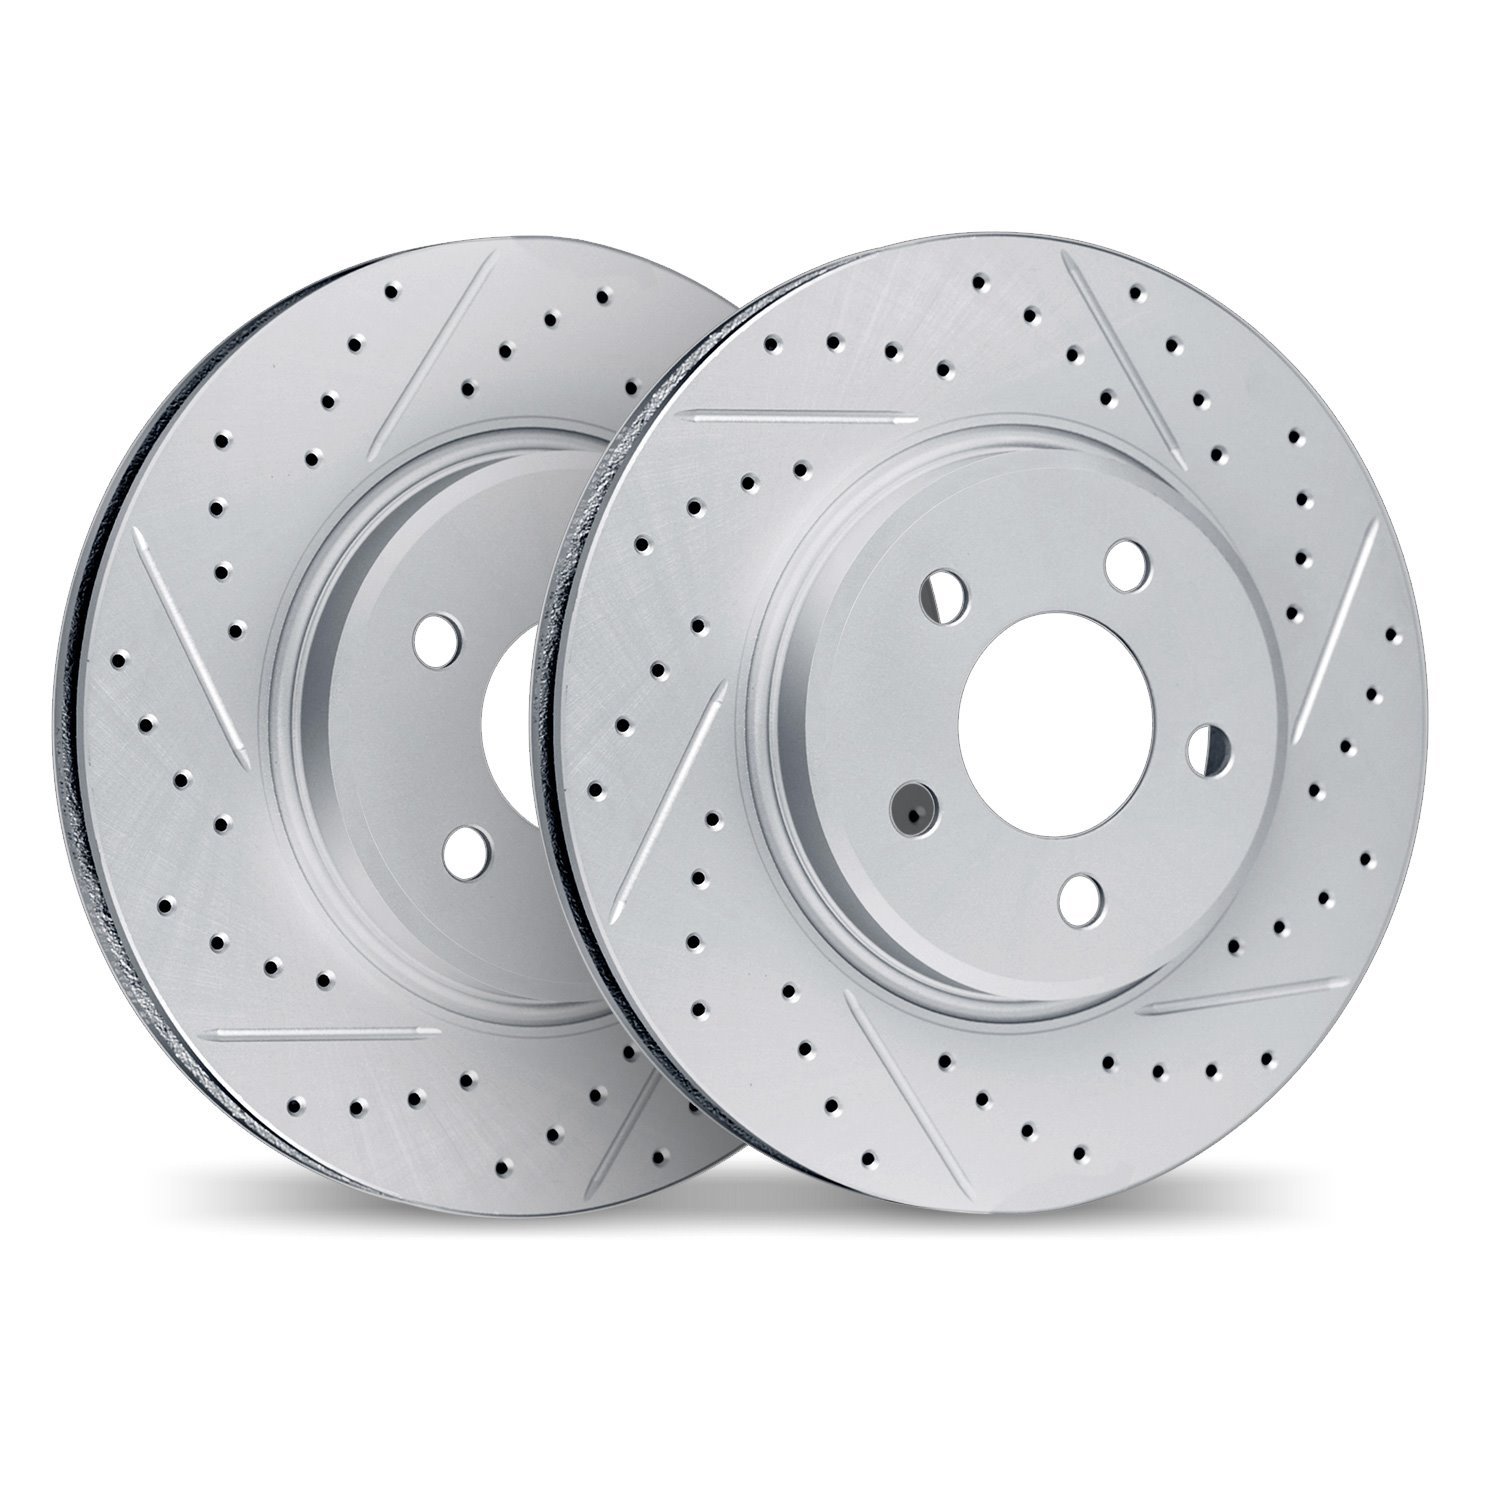 2002-27018 Geoperformance Drilled/Slotted Brake Rotors, 2003-2014 Volvo, Position: Front